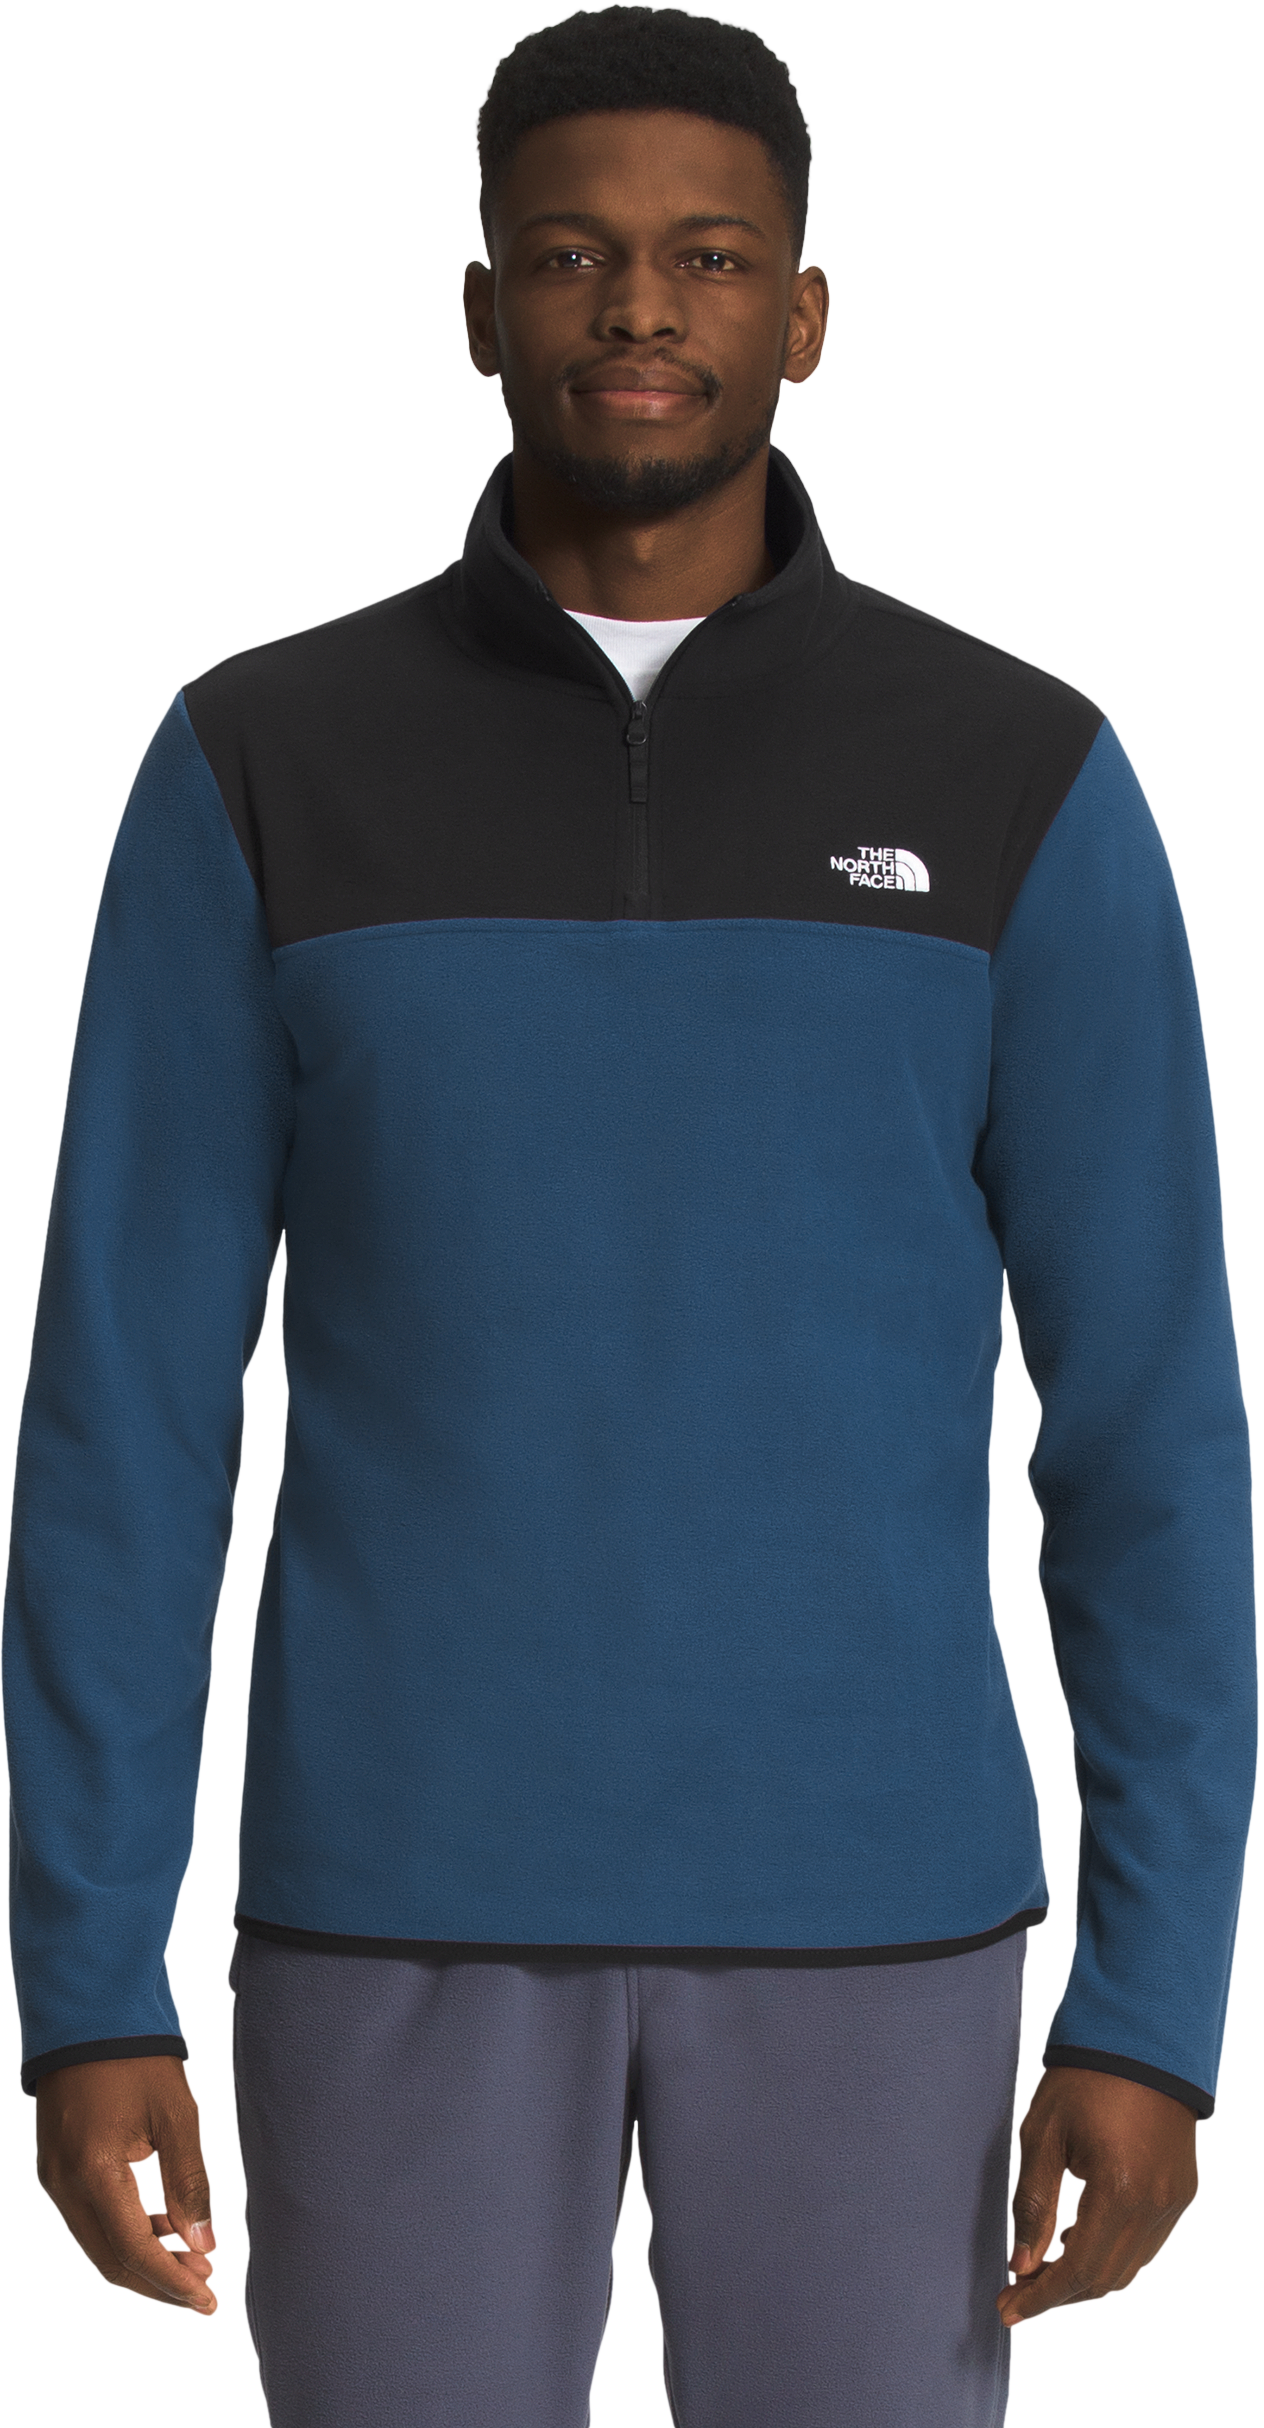 The North Face TKA 100 Zip-In Fleece Top - Youth